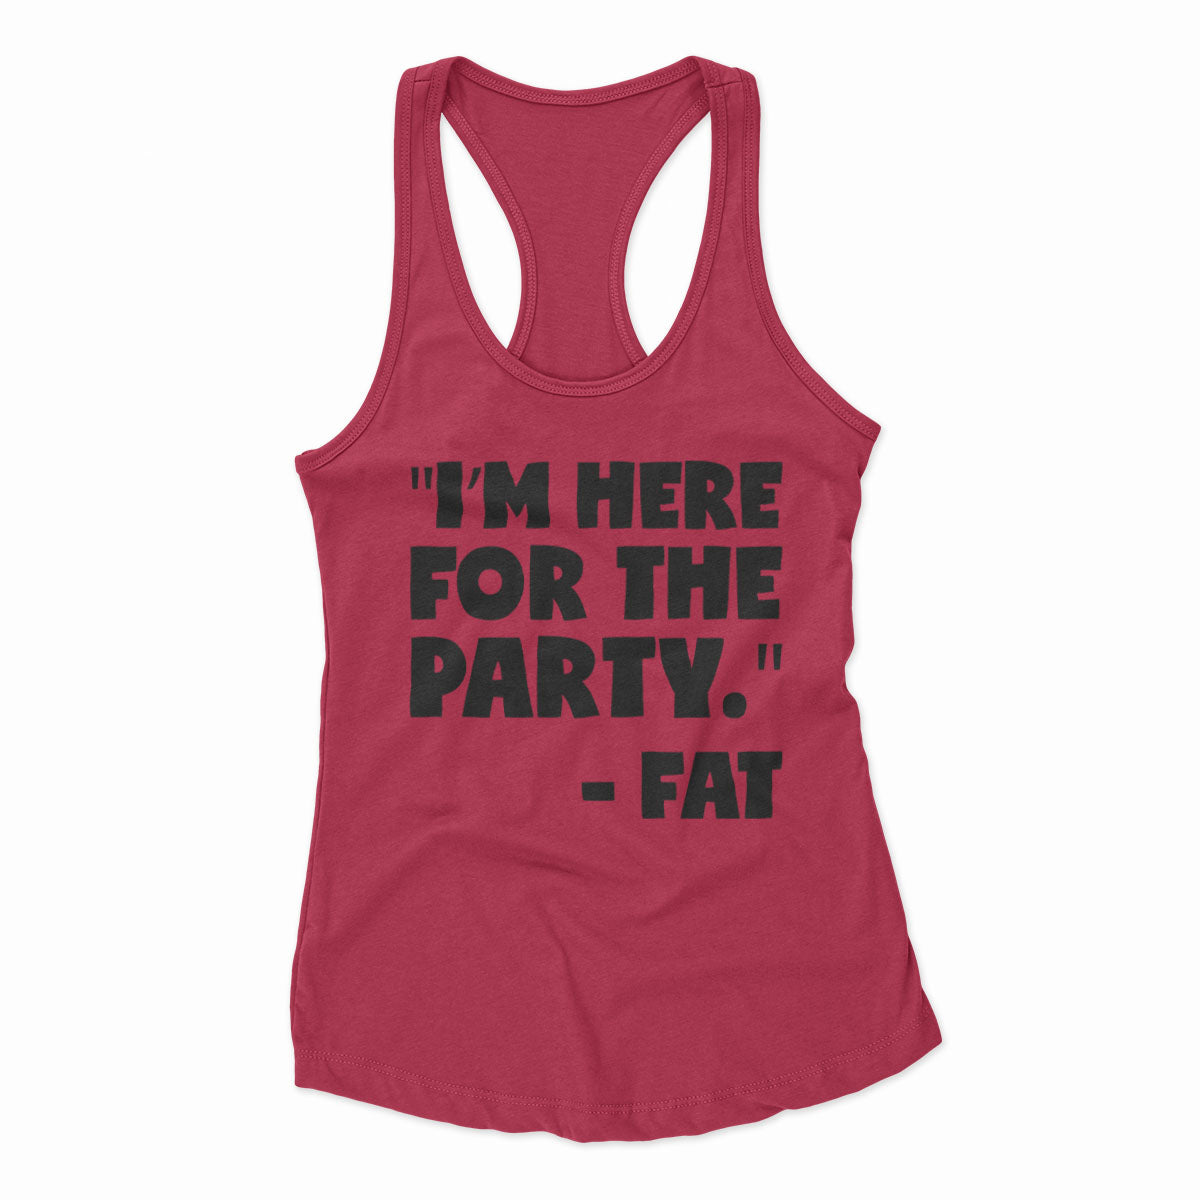 I'm Here For The Party - Fat